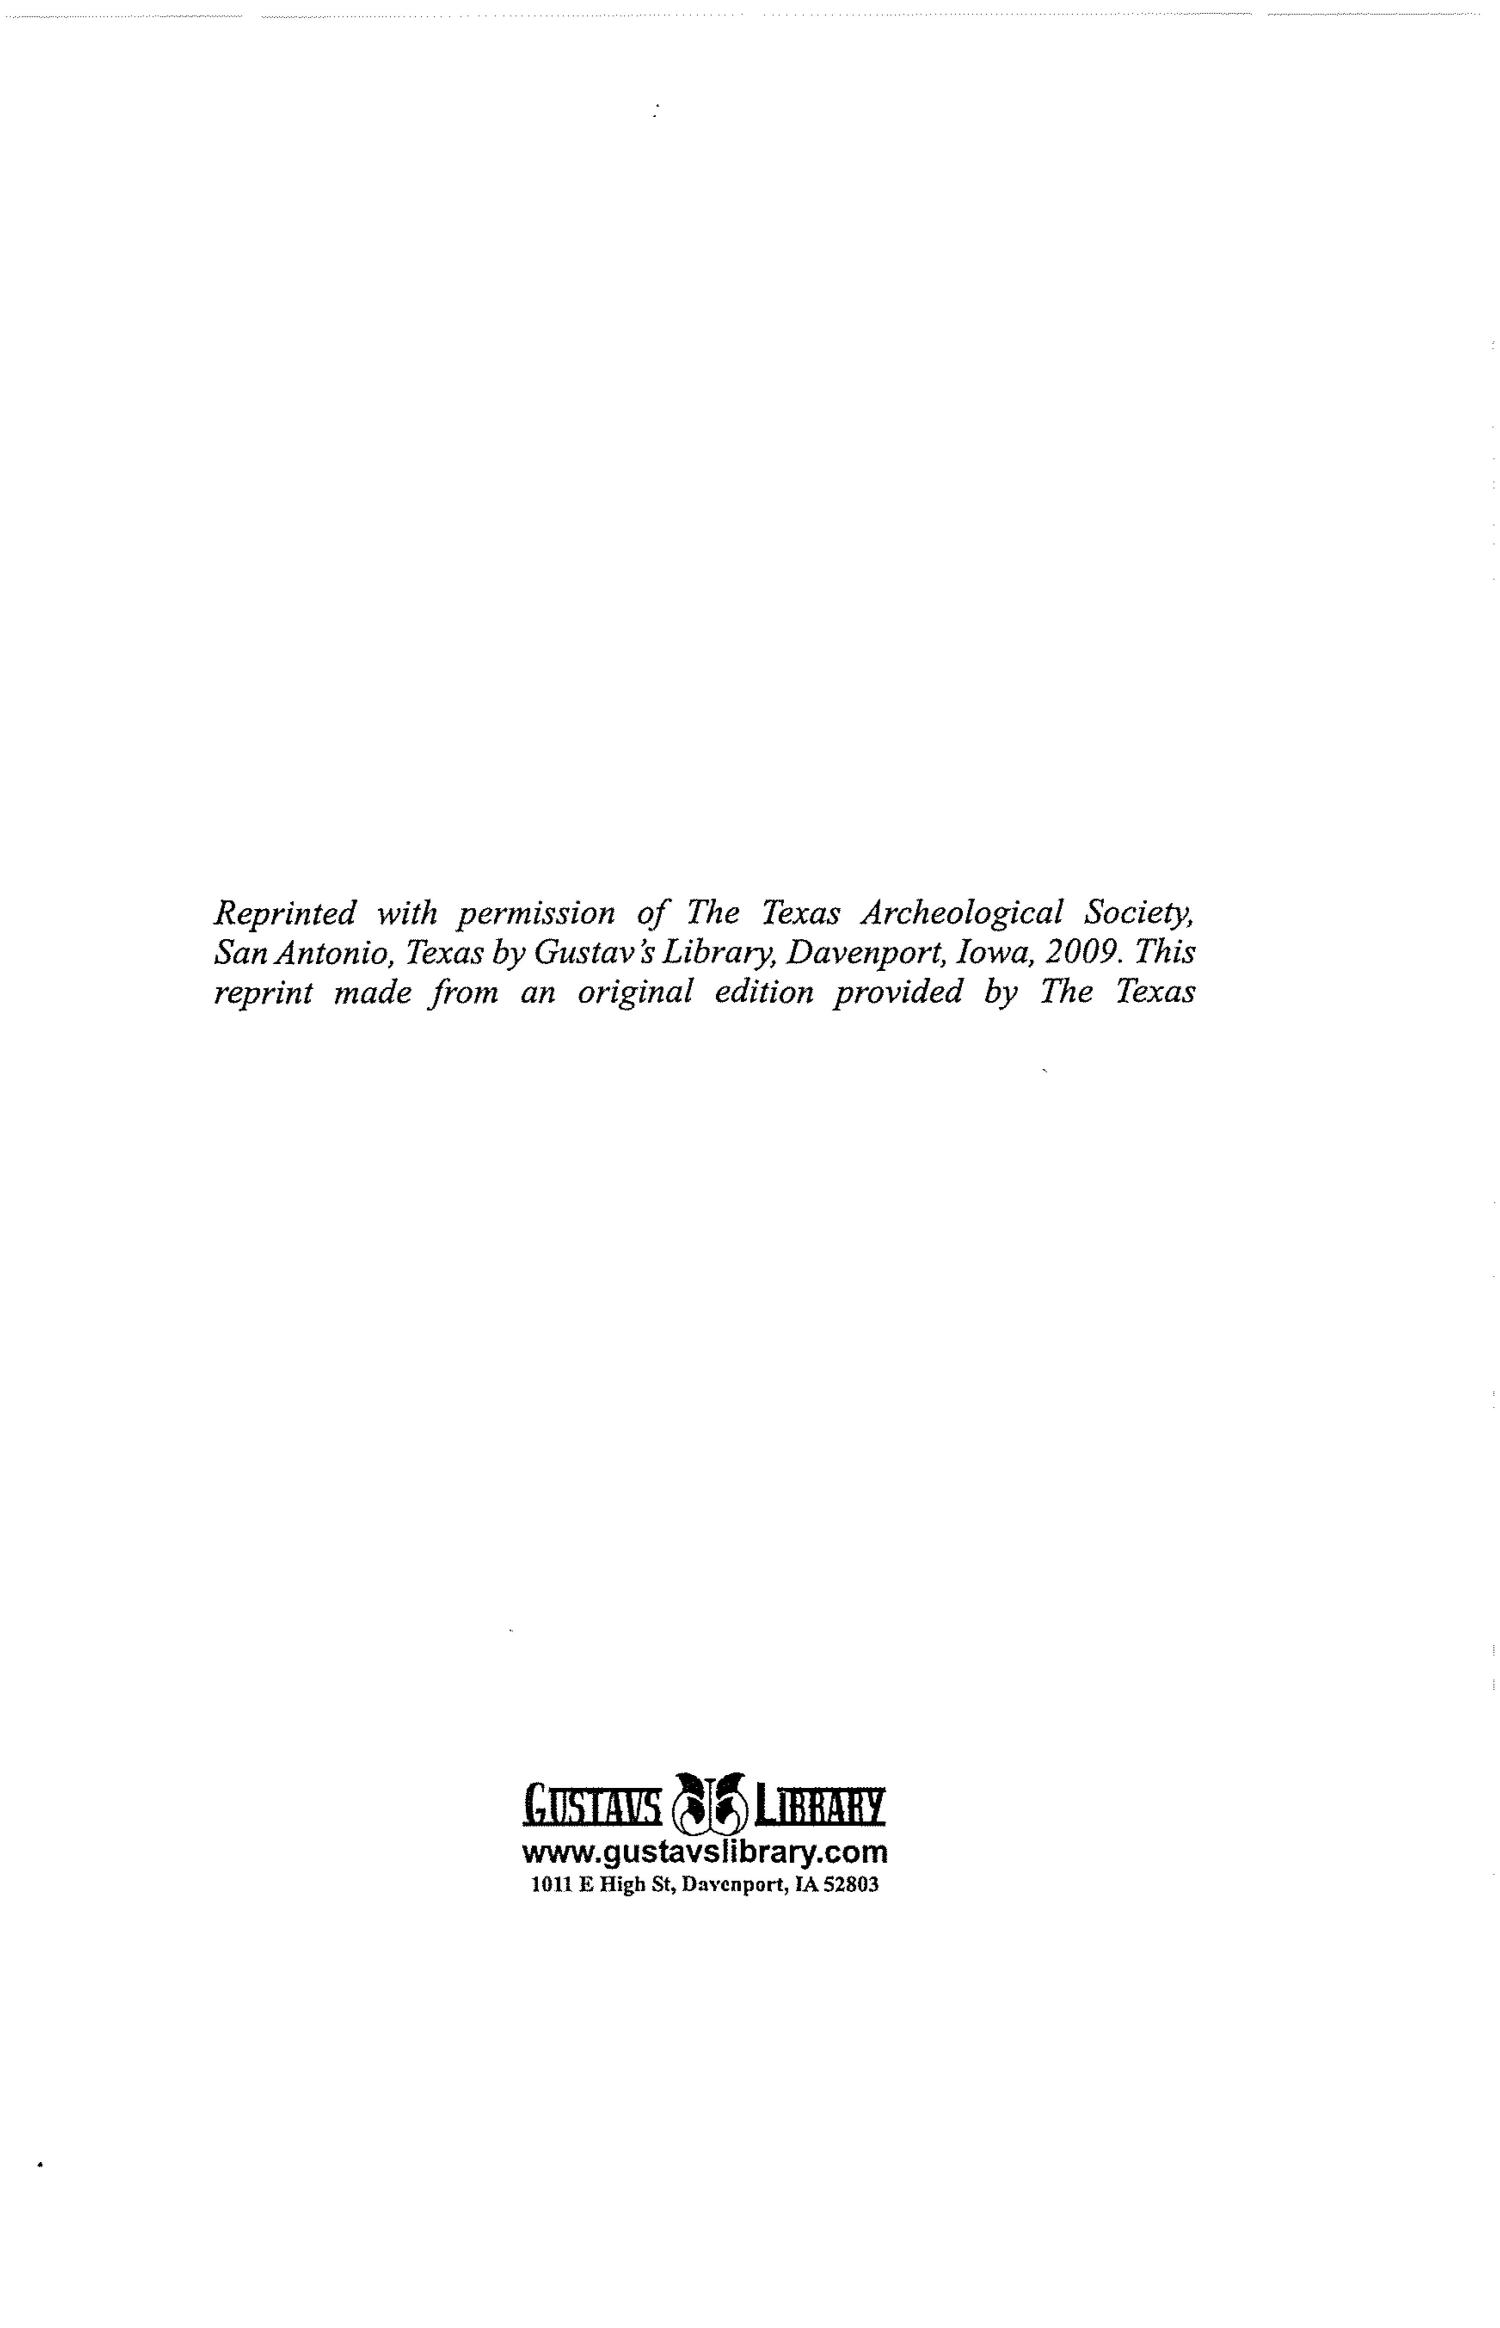 Bulletin of the Texas Archeological and Paleontological Society, Volumes 21 & 22, 1950-1951
                                                
                                                    None
                                                